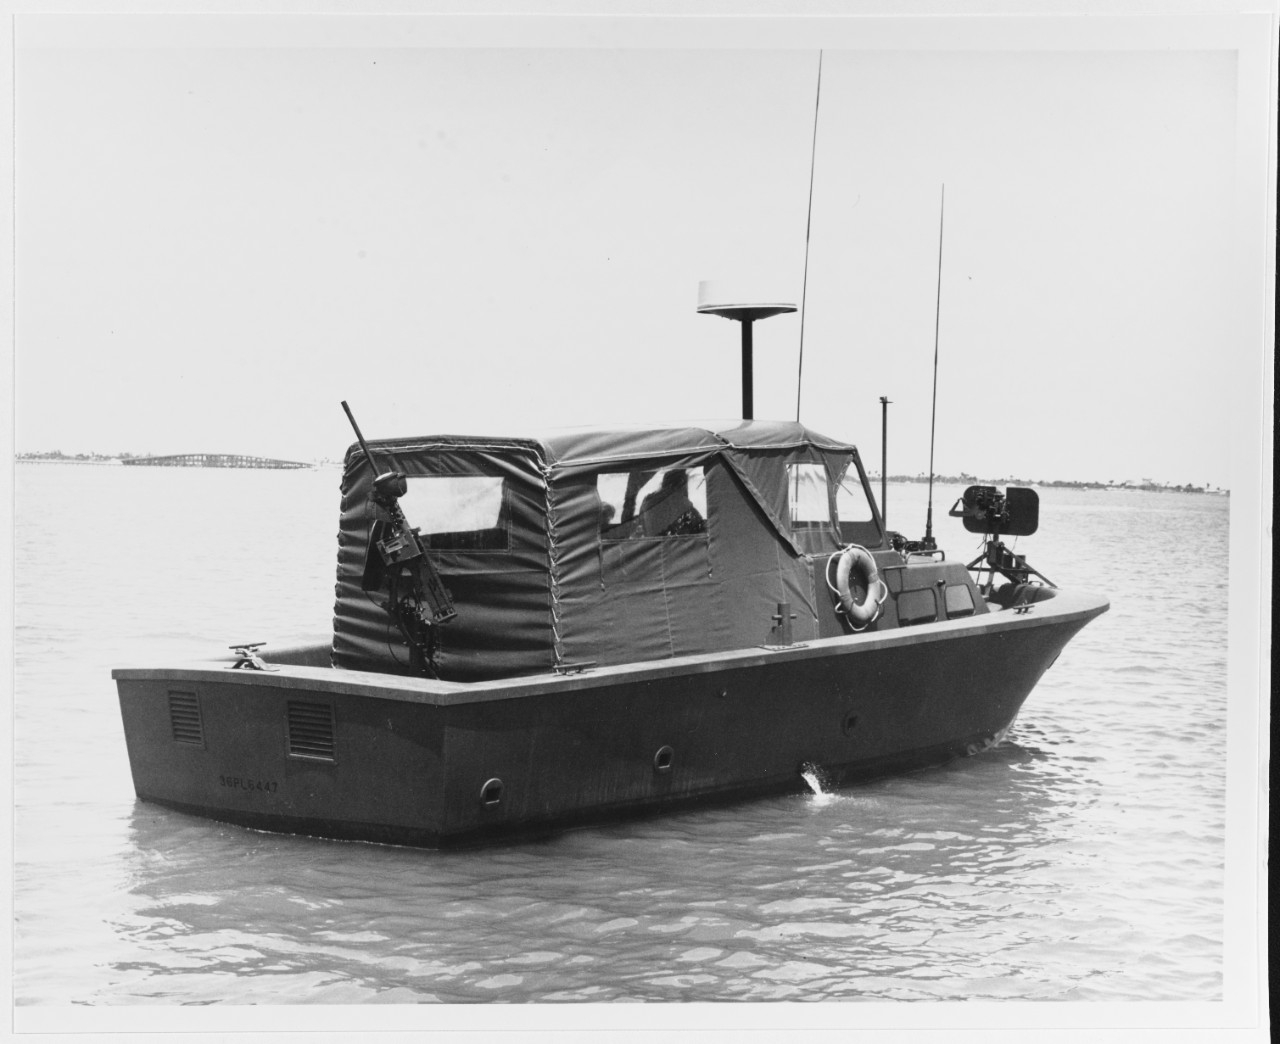 36-foot landing craft personnel ( Large), Mark XI (LCPL)